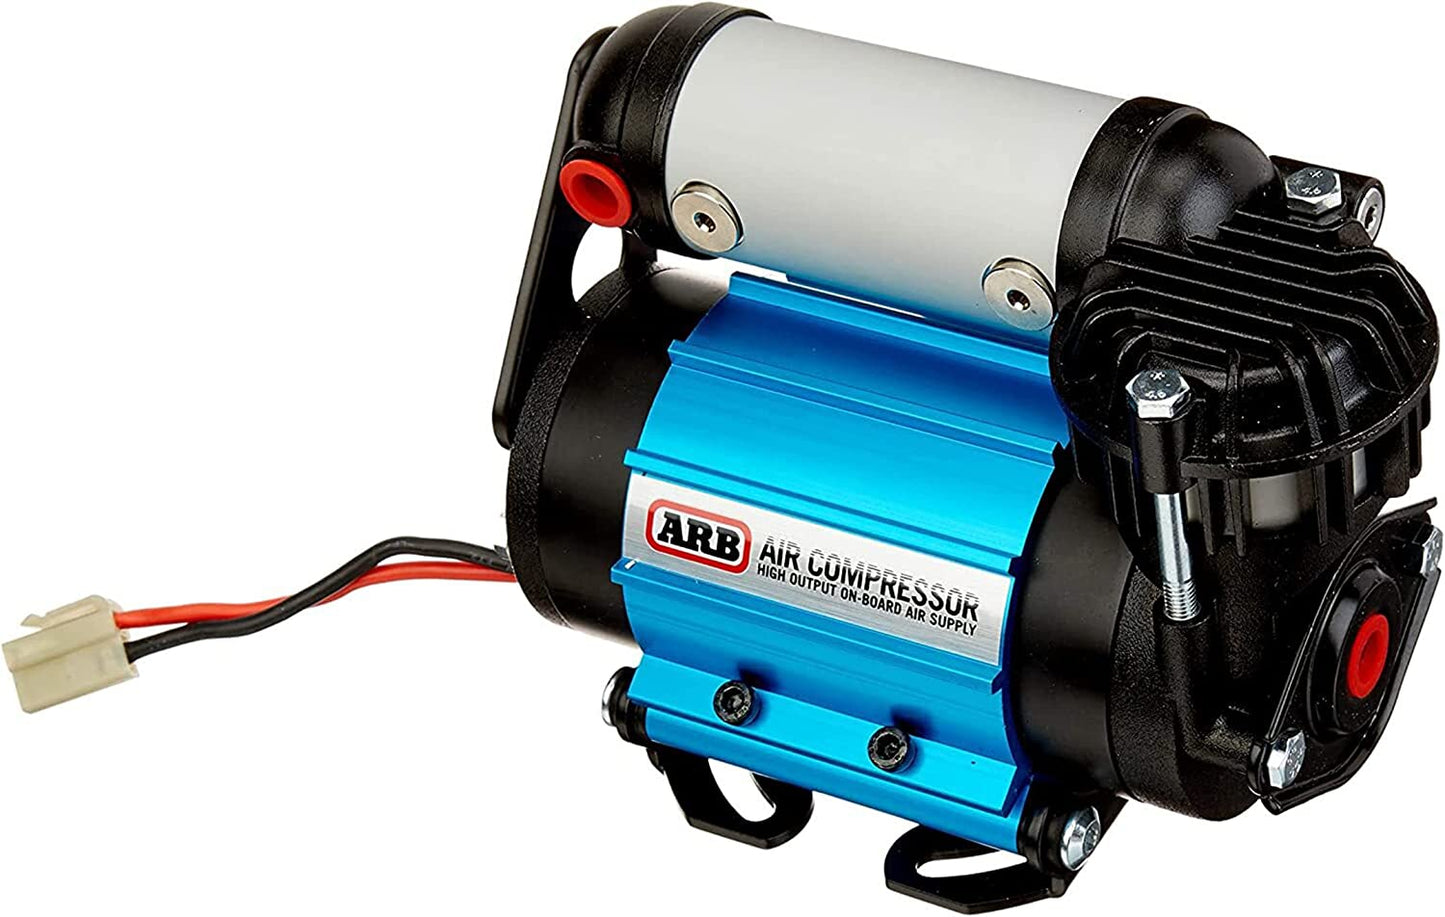 ARB CKMA12 On-Board Air Compressor High Performance 12 Volt for Air Locker Differentials and Tire Inflation